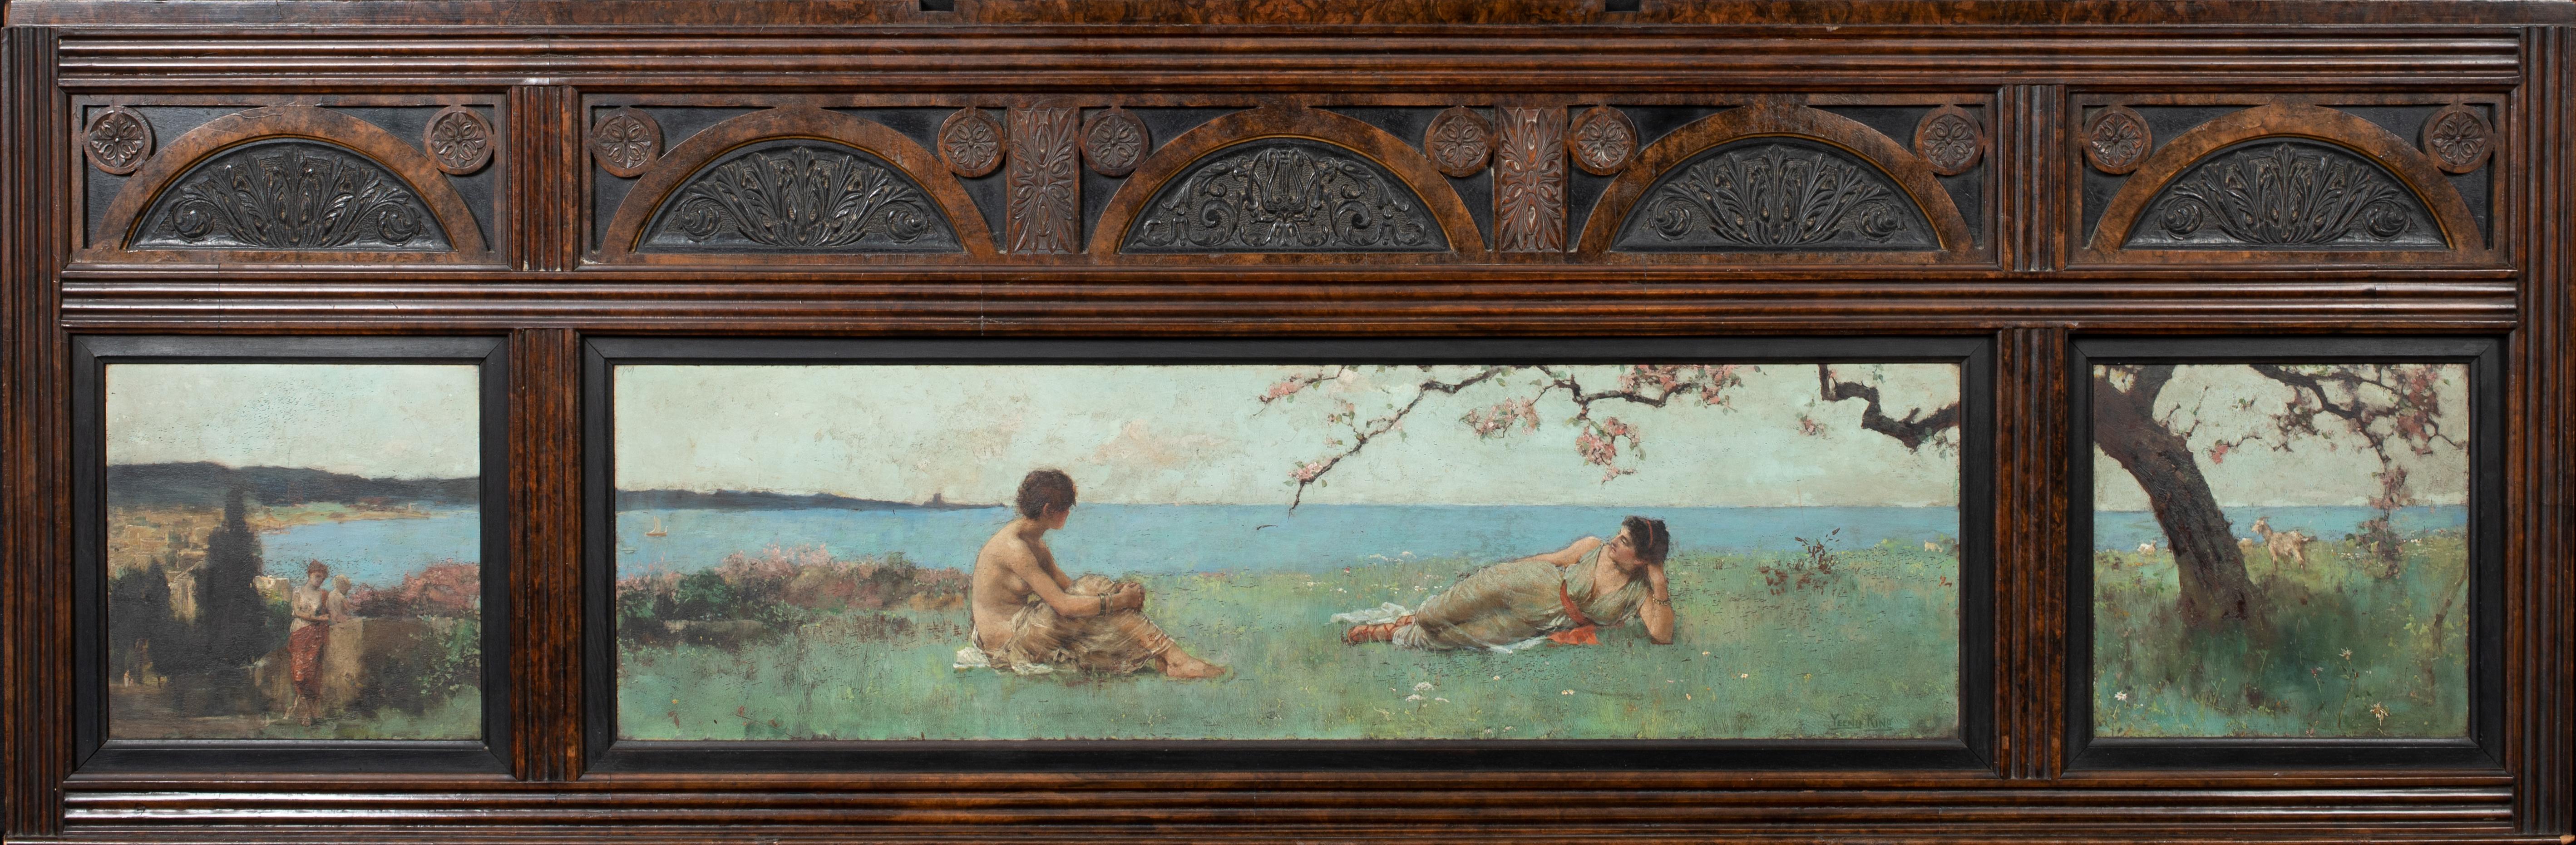 Henry John Yeend King Nude Painting - Triptych Of Maidens In Spring, circa 1900